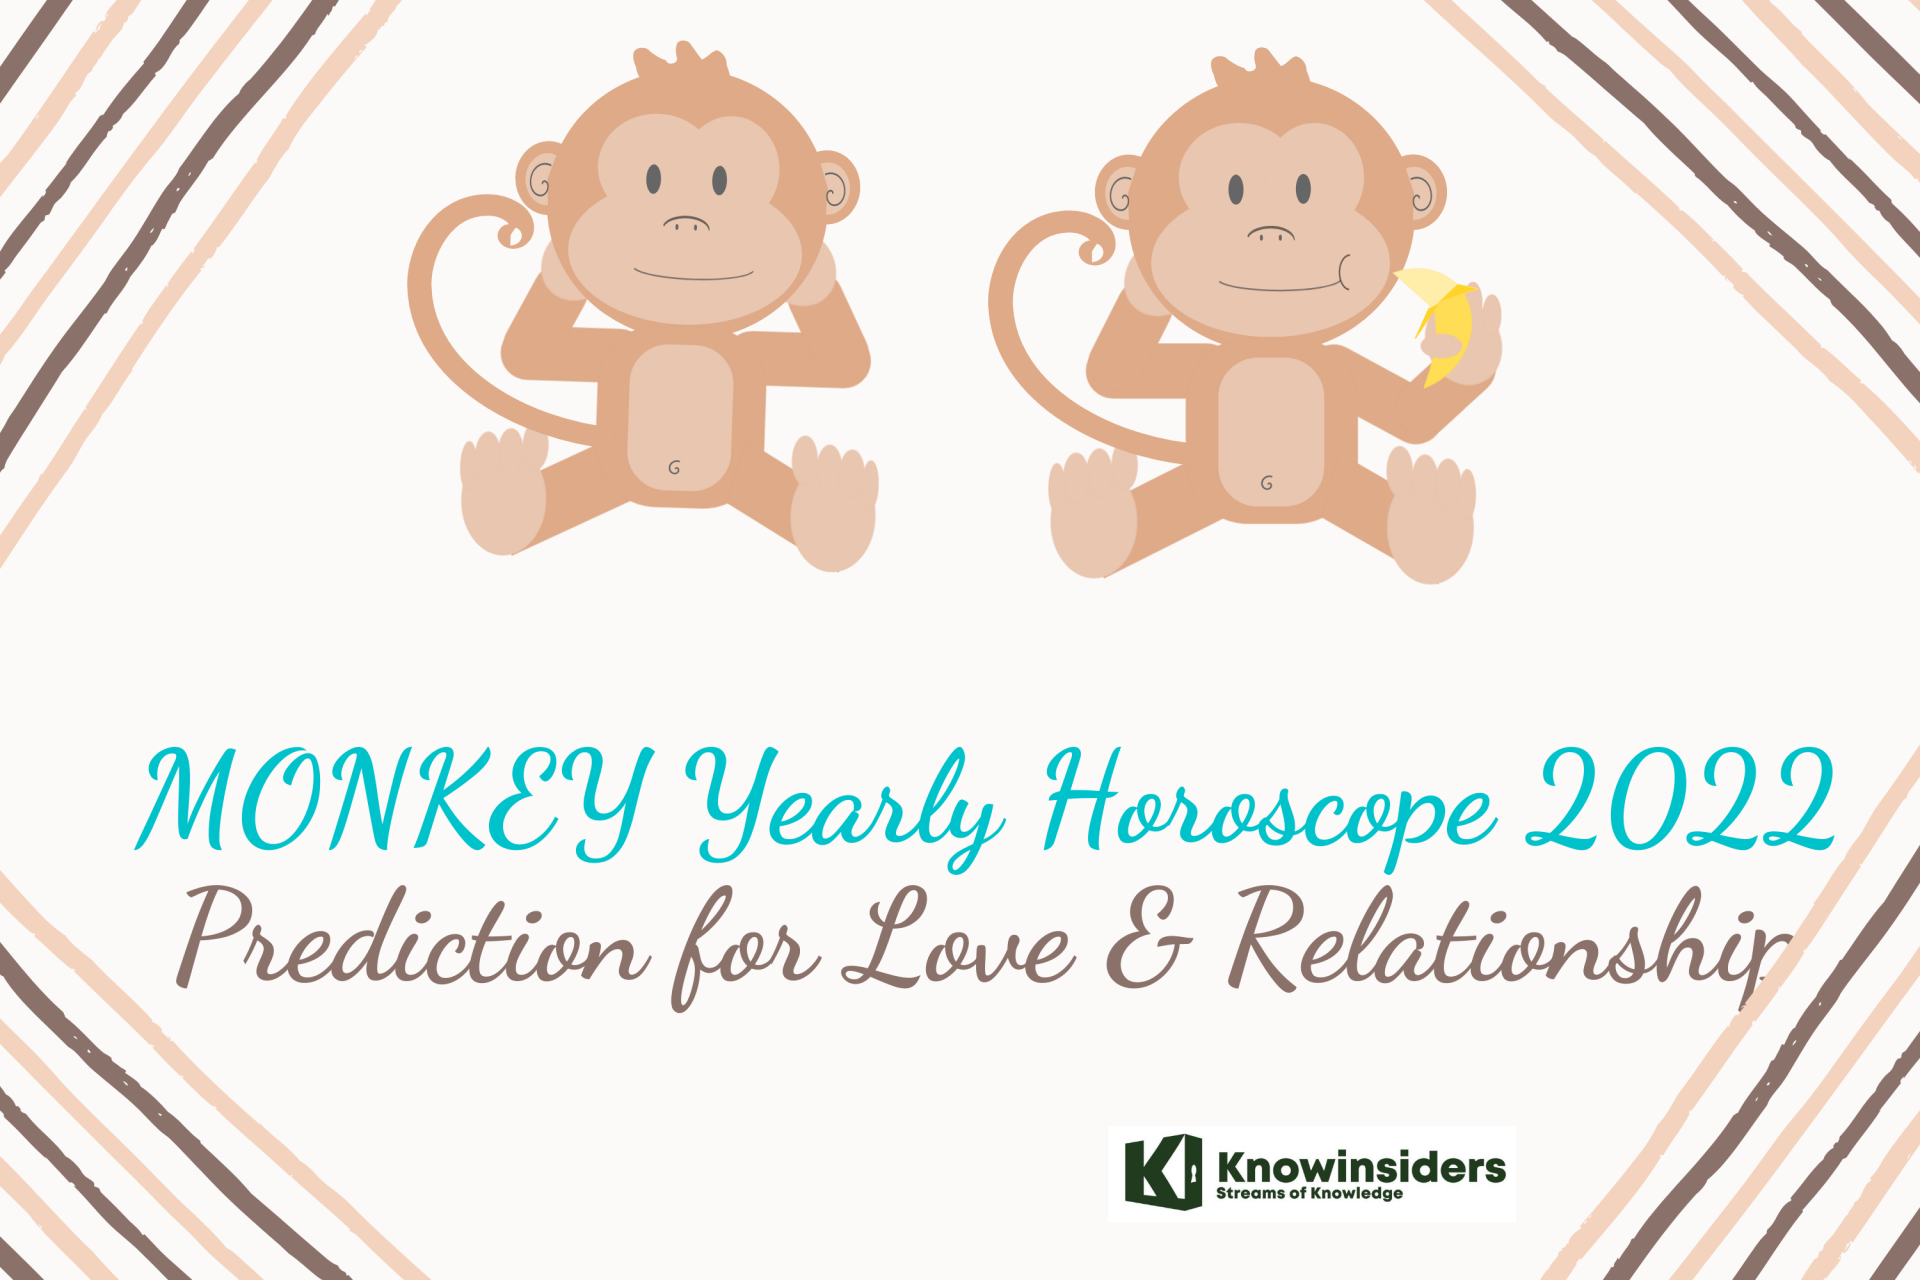 MONKEY Yearly Horoscope 2022 – Feng Shui Prediction for Love & Relationship